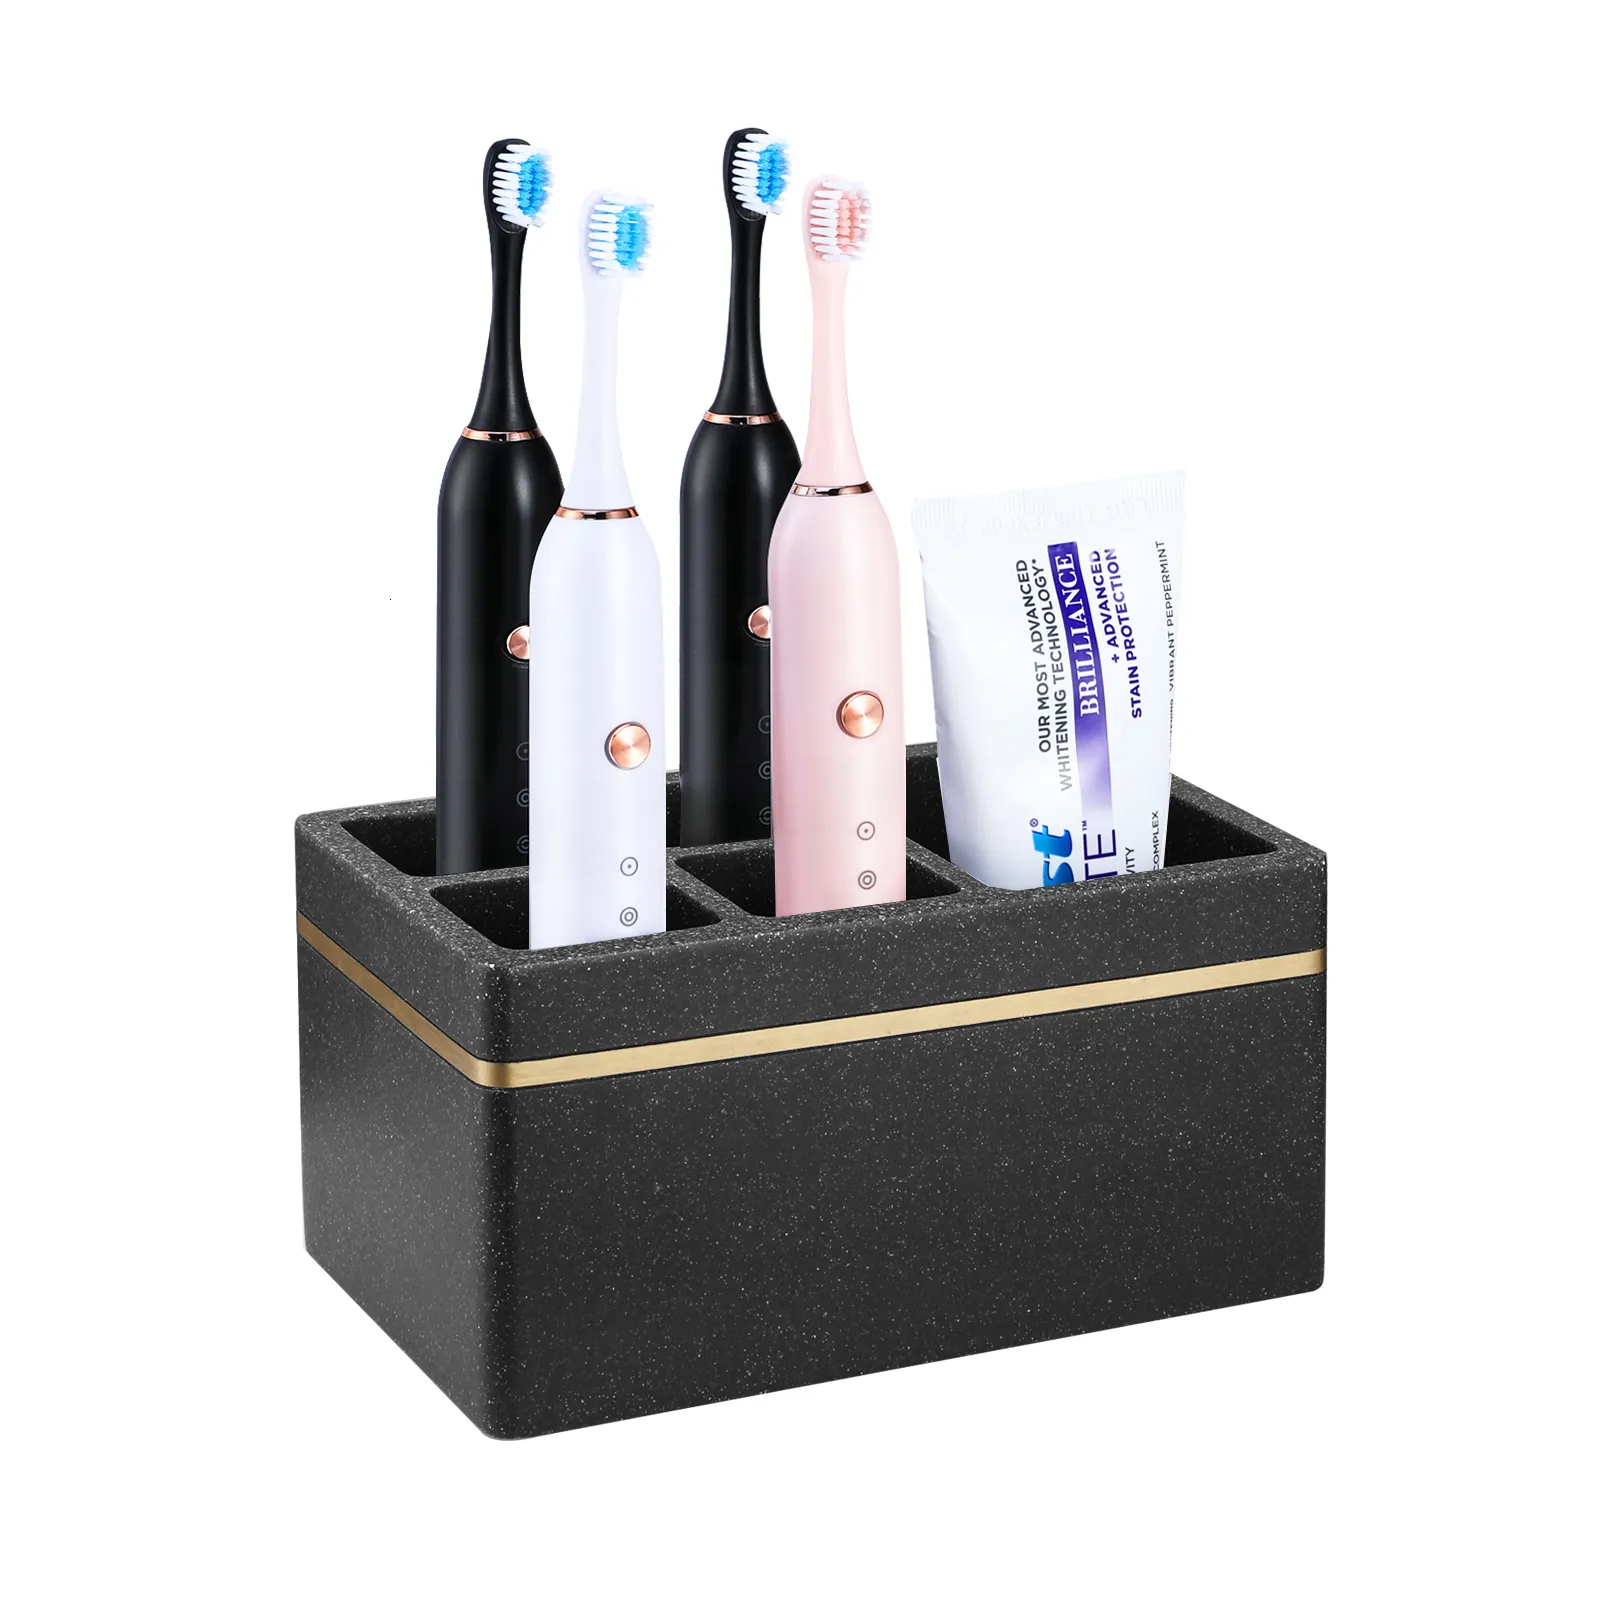 Toothbrush Holders Luxspire Resin Electric Toothpaste Holder Stand Caddy 5 Slots Bathroom Vanity Countertop Storage 230308